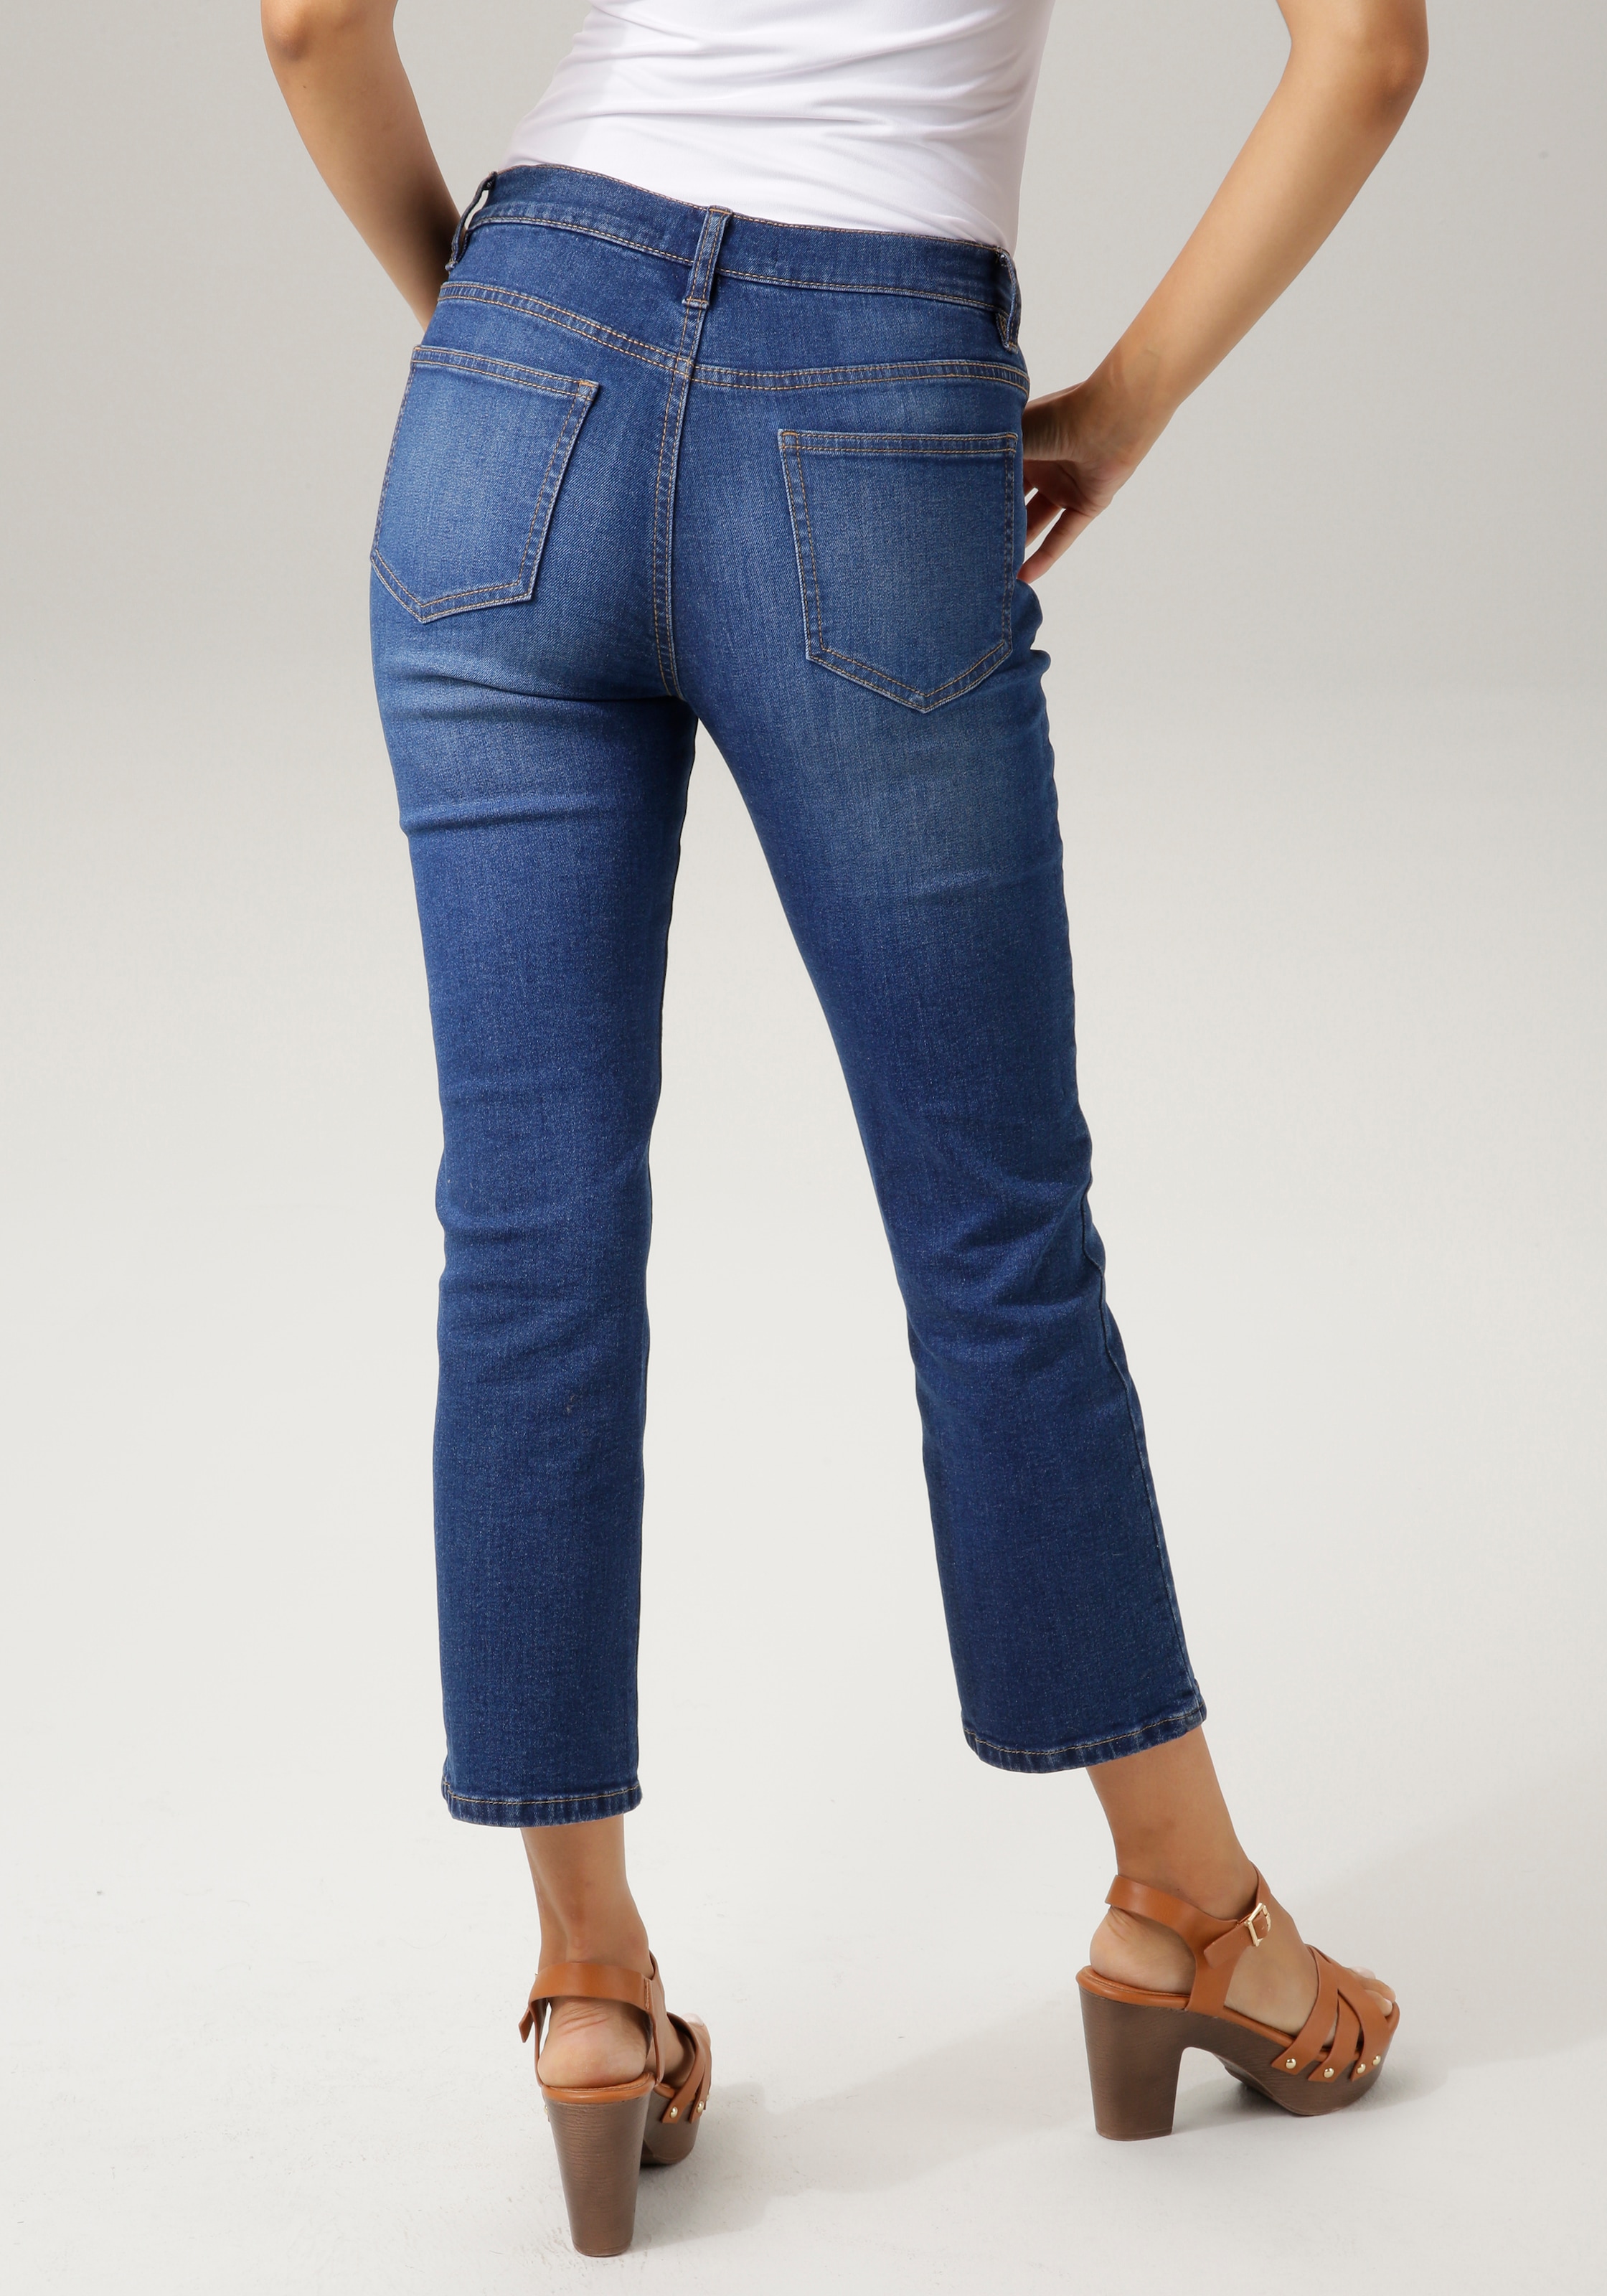 ♕ in Aniston 7/8-Länge trendiger bei CASUAL Bootcut-Jeans,